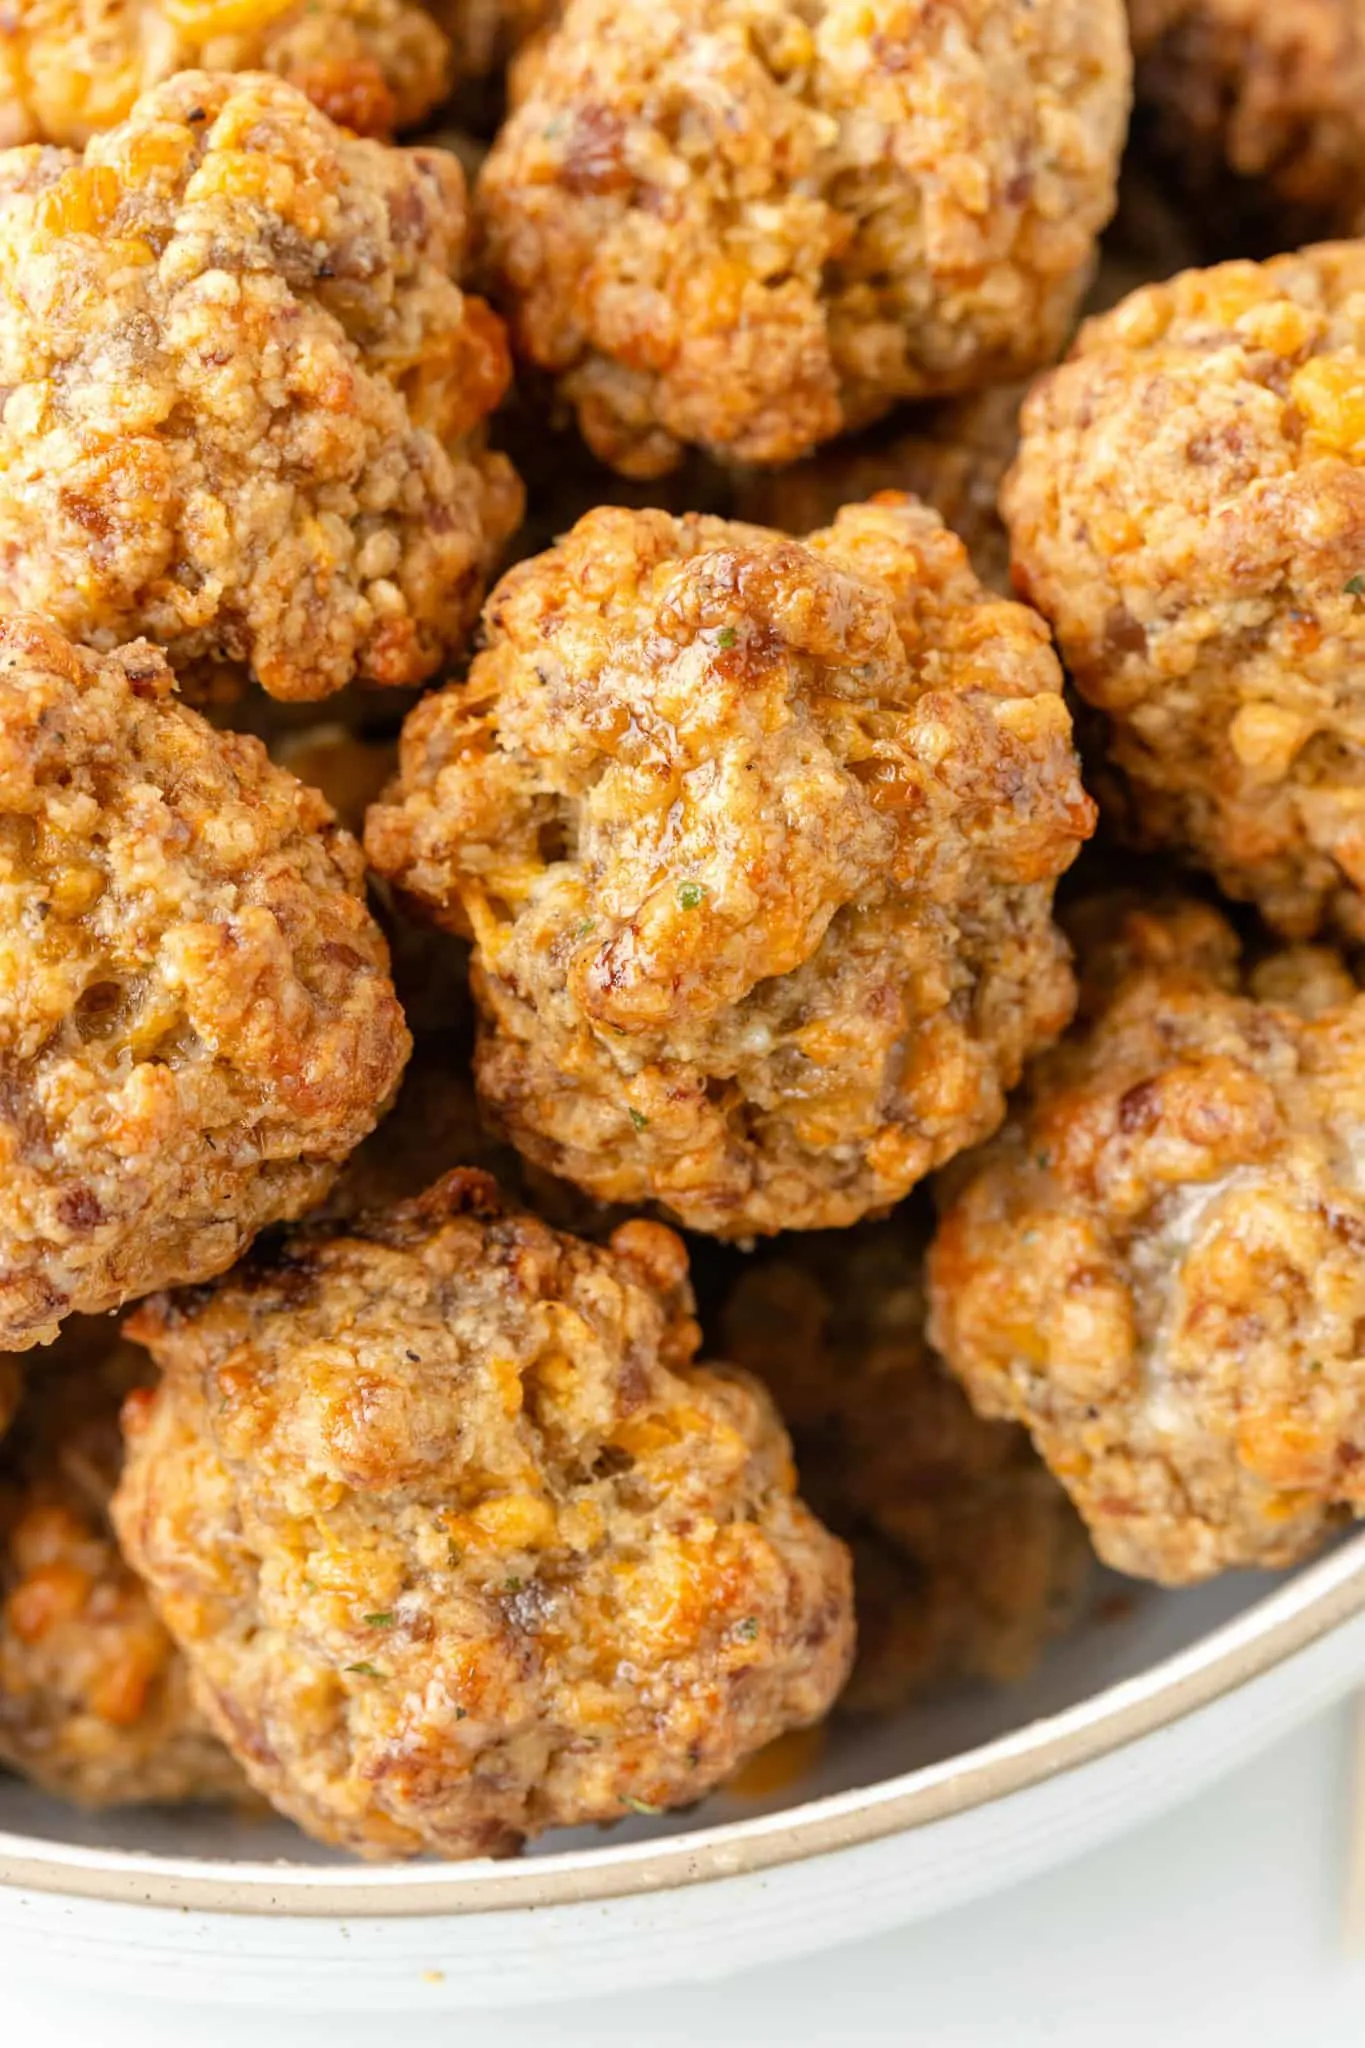 Cheddar Bay Sausage Balls are delicious bite sized balls made with sausage meat, shredded cheddar cheese and Red Lobster Cheddar Bay Biscuit mix.